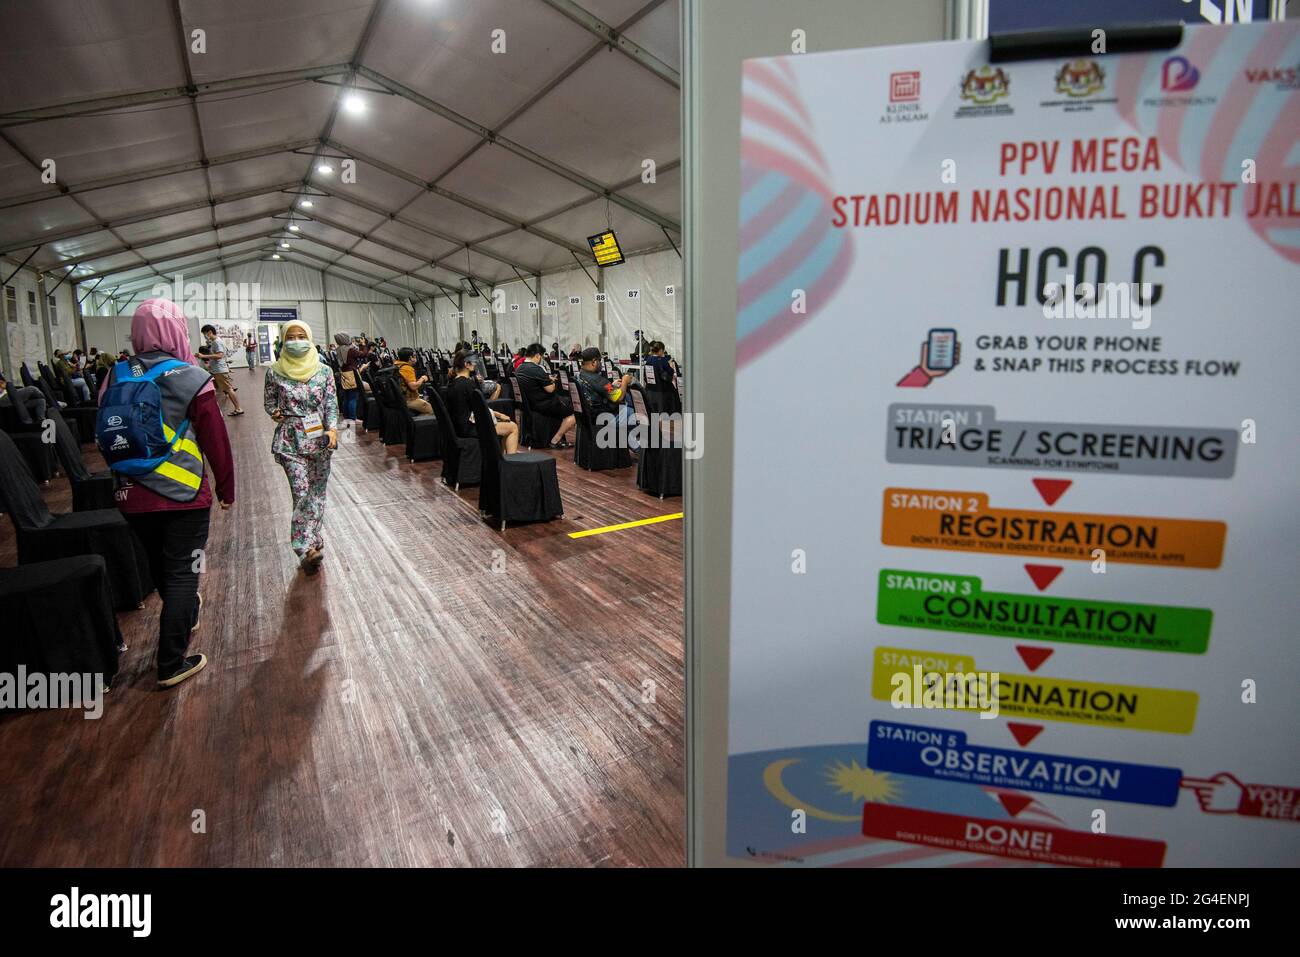 Kuala Lumpur, Malaysia. 21st June, 2021. People wait before they leave after receiving COVID-19 vaccines at the Bukit Jalil National Stadium vaccination center in Kuala Lumpur, Malaysia, on June 21, 2021. Malaysia reported another 4,611 new COVID-19 infections, bringing the national total to 701,019, the health ministry said on Monday. Credit: Chong Voon Chung/Xinhua/Alamy Live News Stock Photo